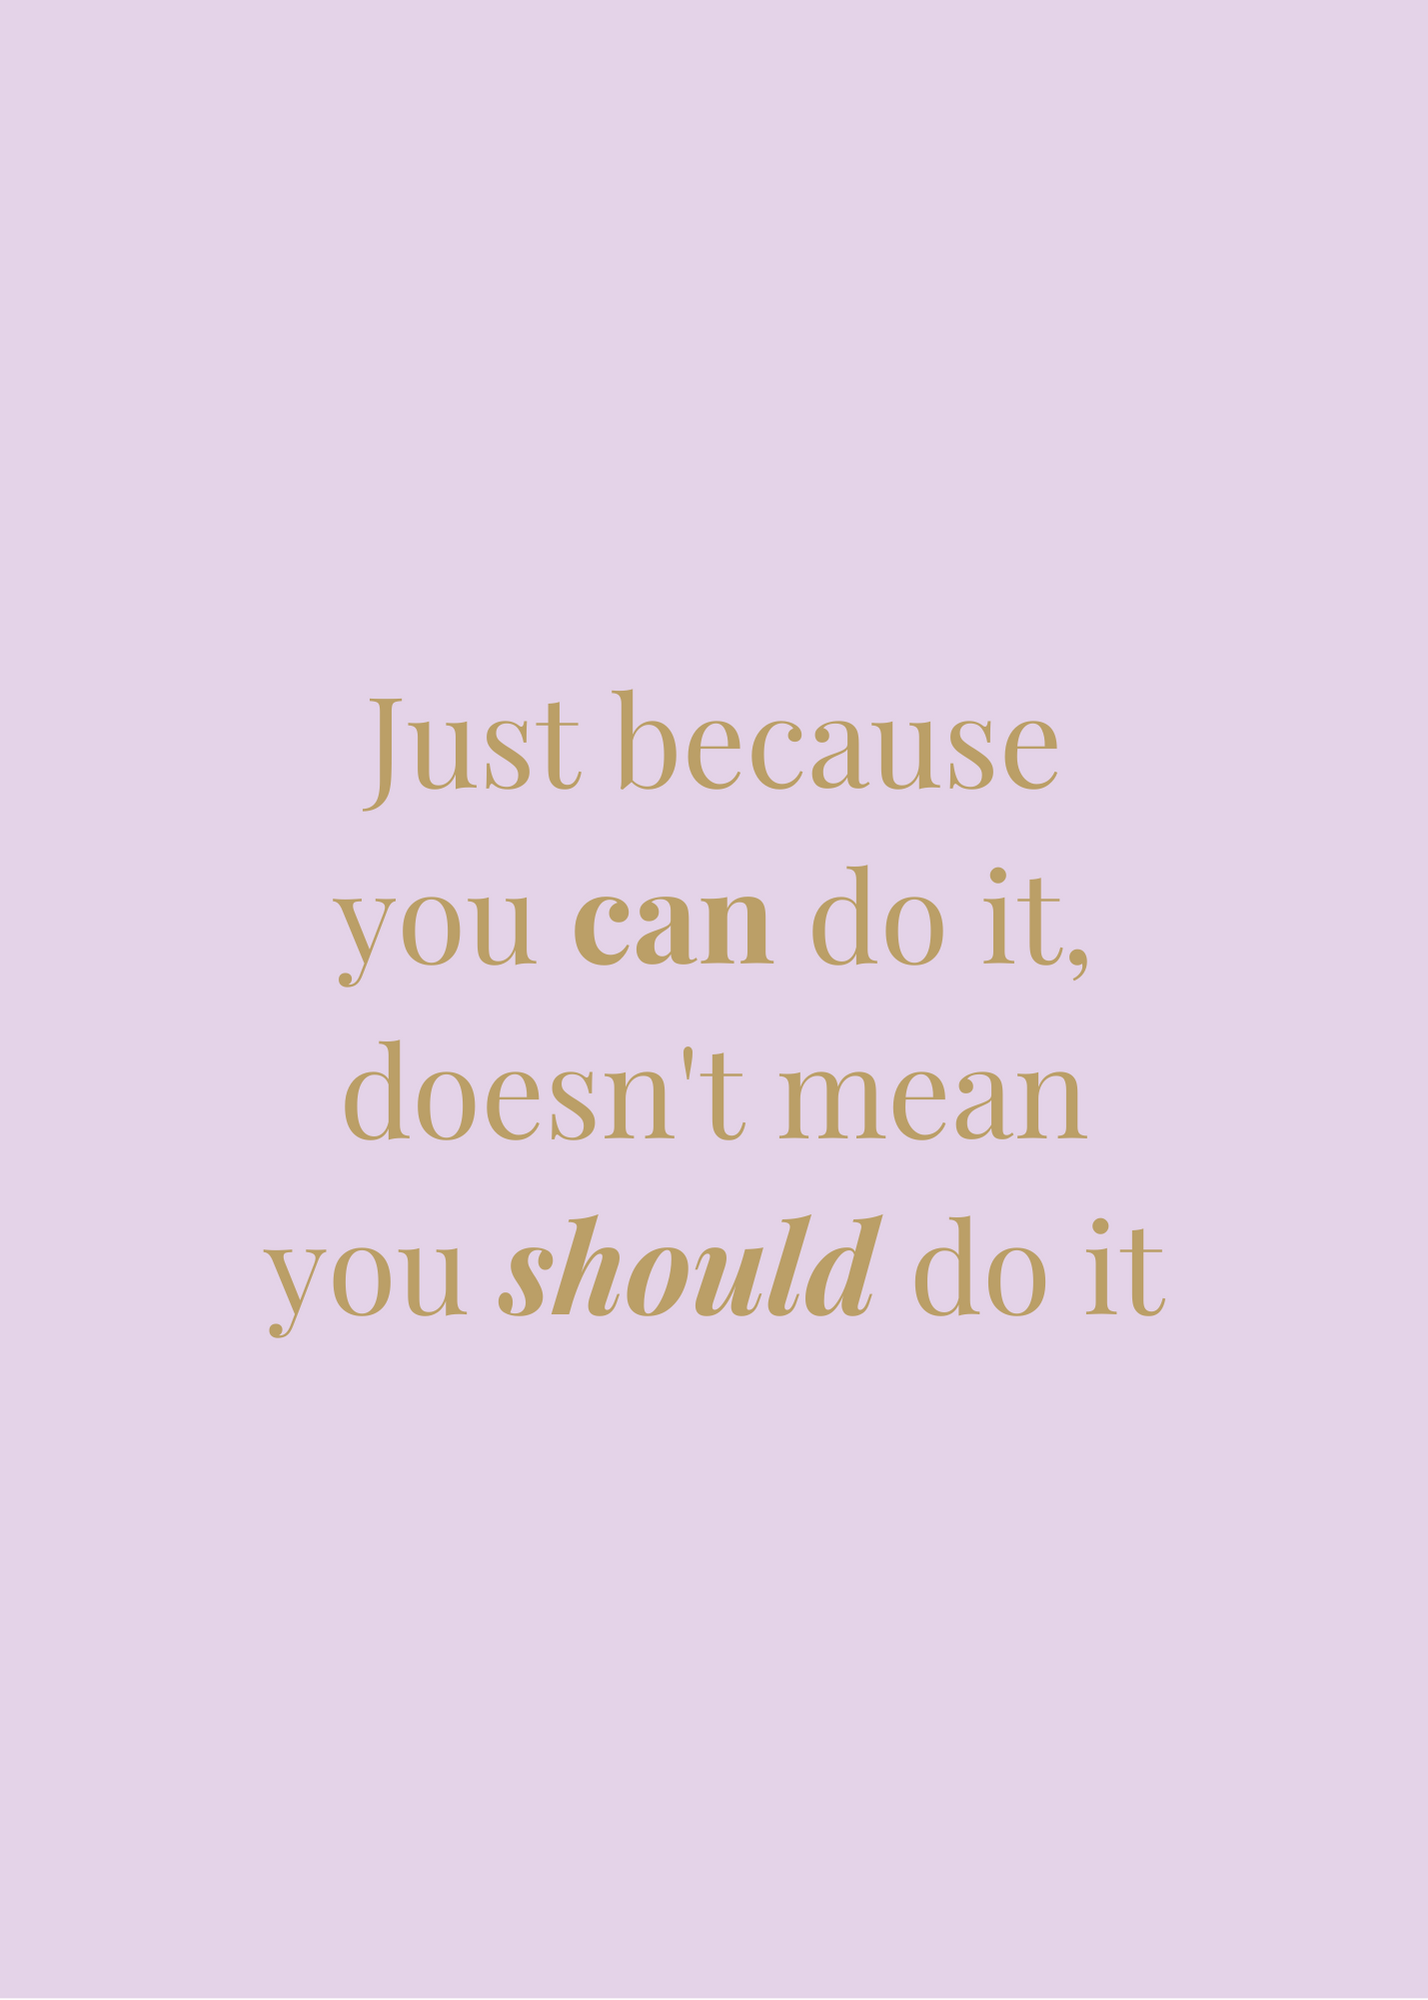 Just because you can do it, doesn't mean you should do it - a message for (manifesting) generators